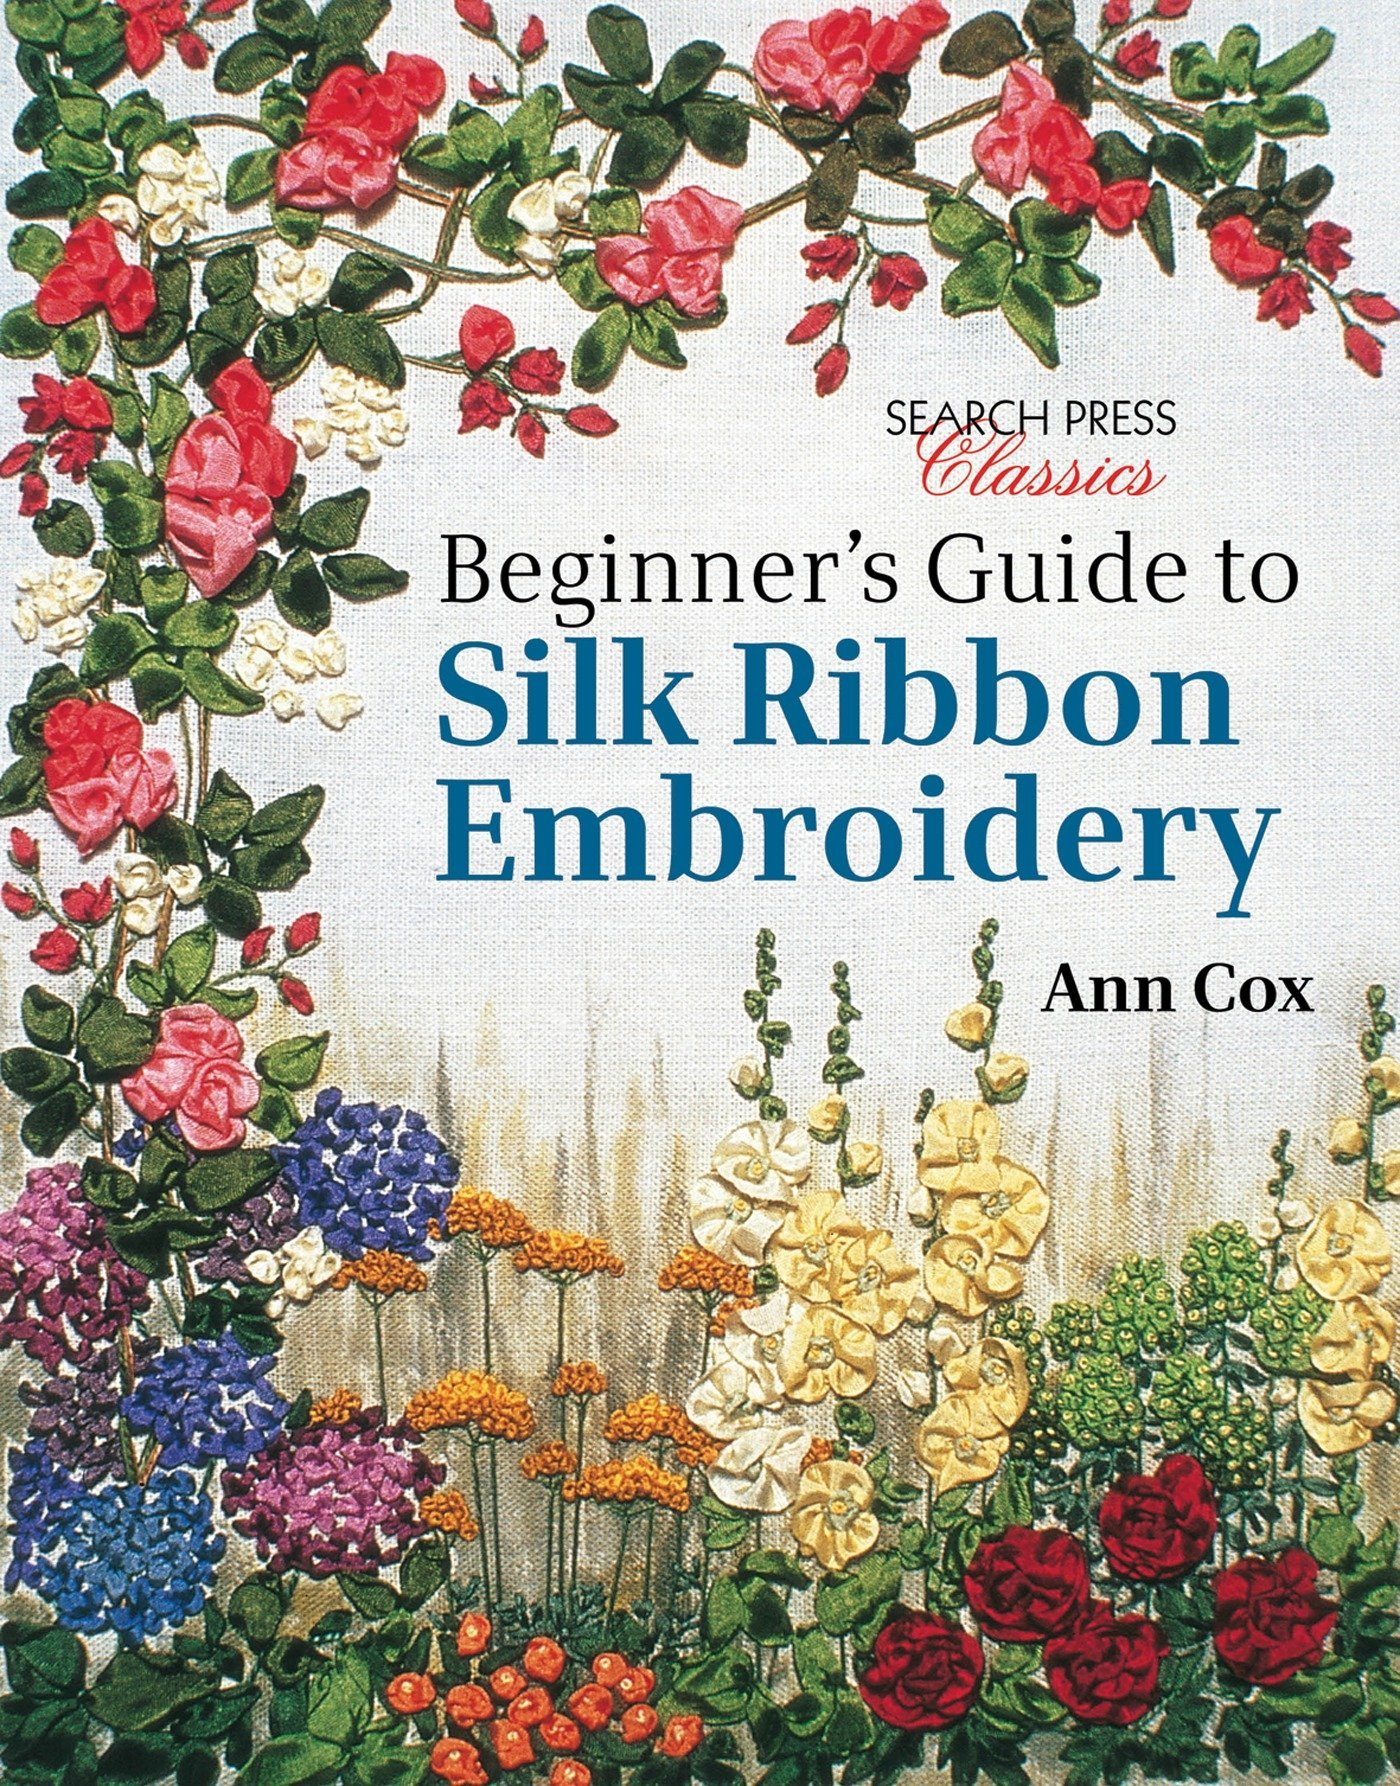 Ribbon Embroidery Flowers Patterns How To Silk Ribbon Embroidery Free Embroidery Patterns